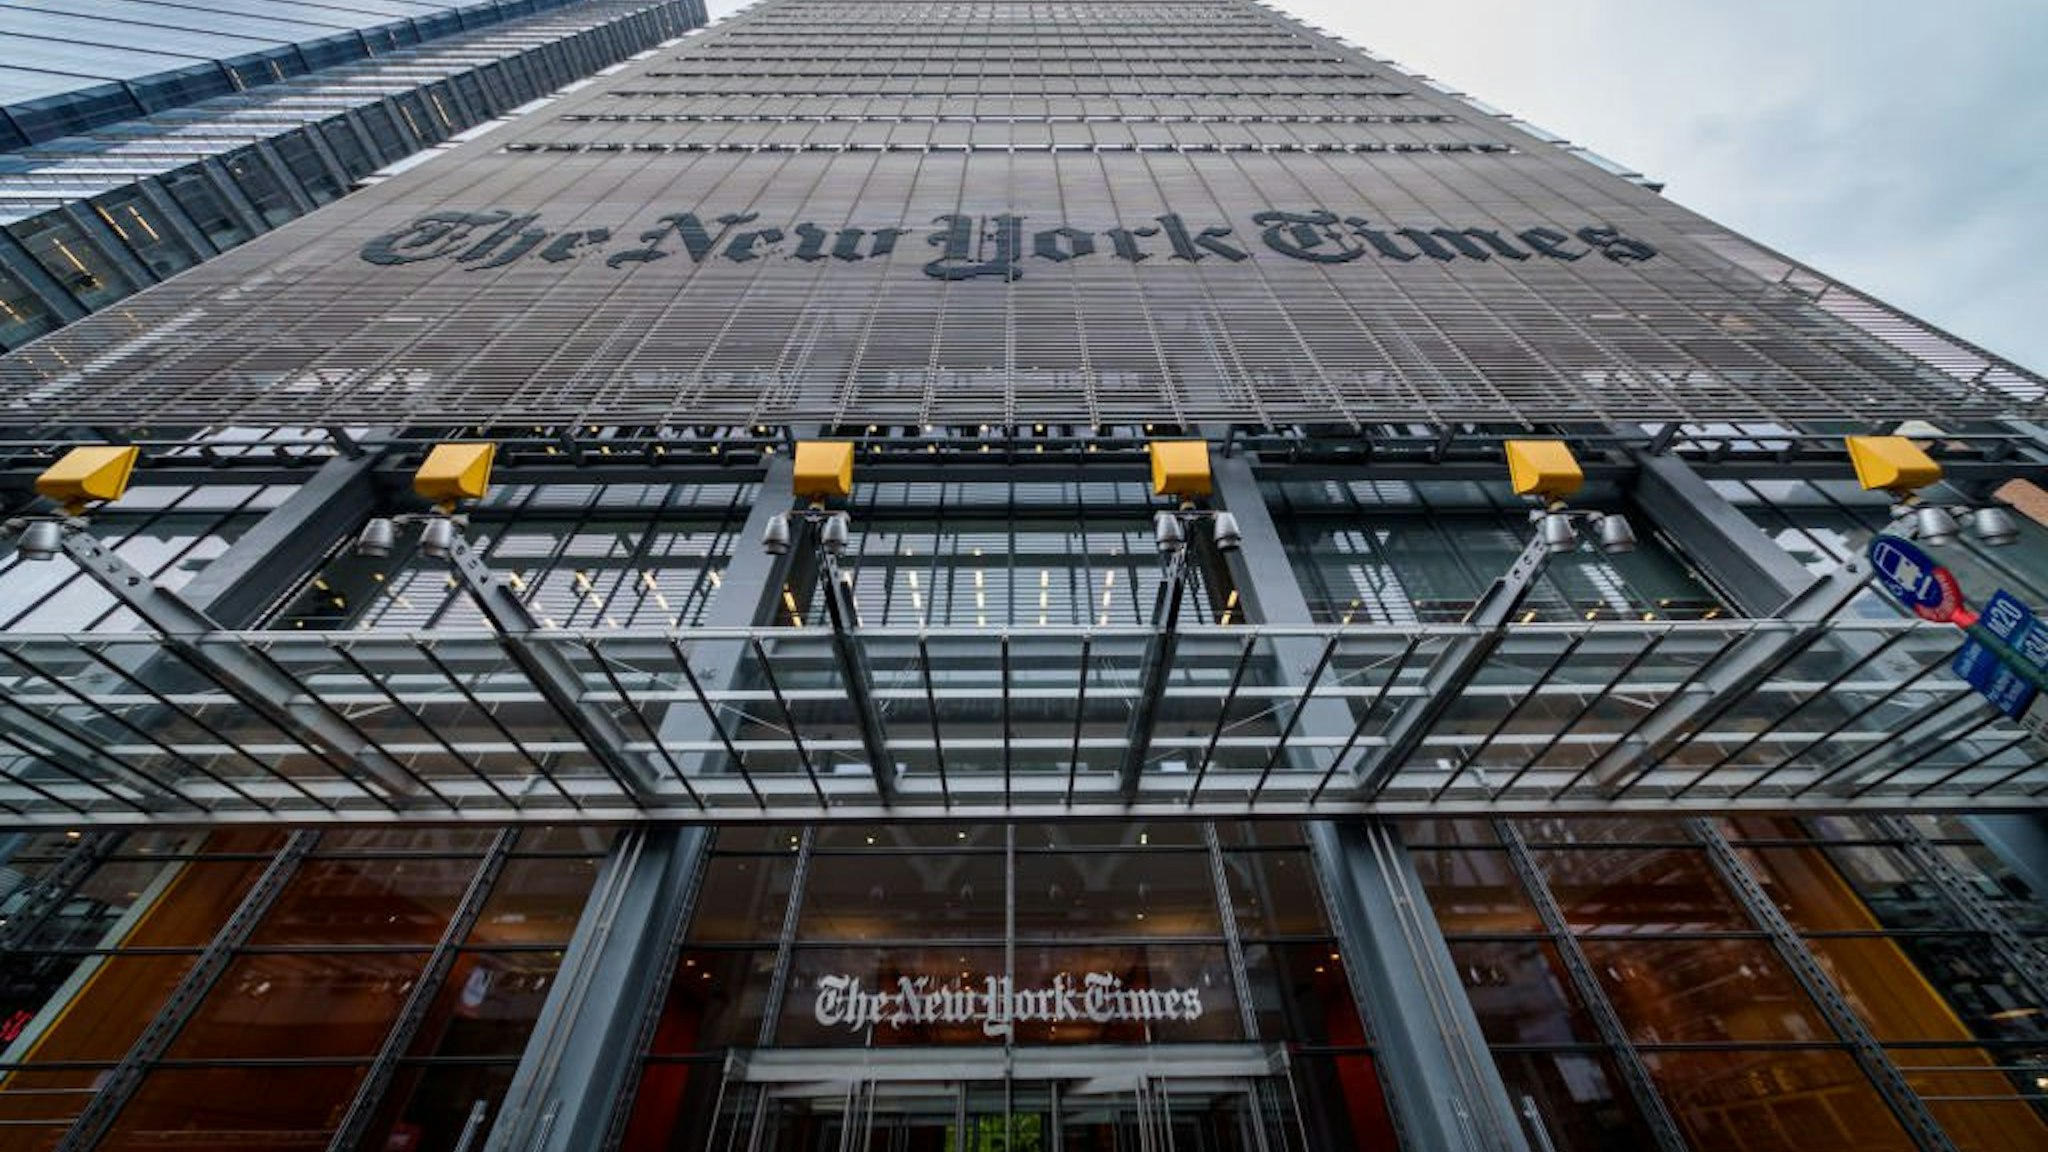 The New York Times Headquarters.